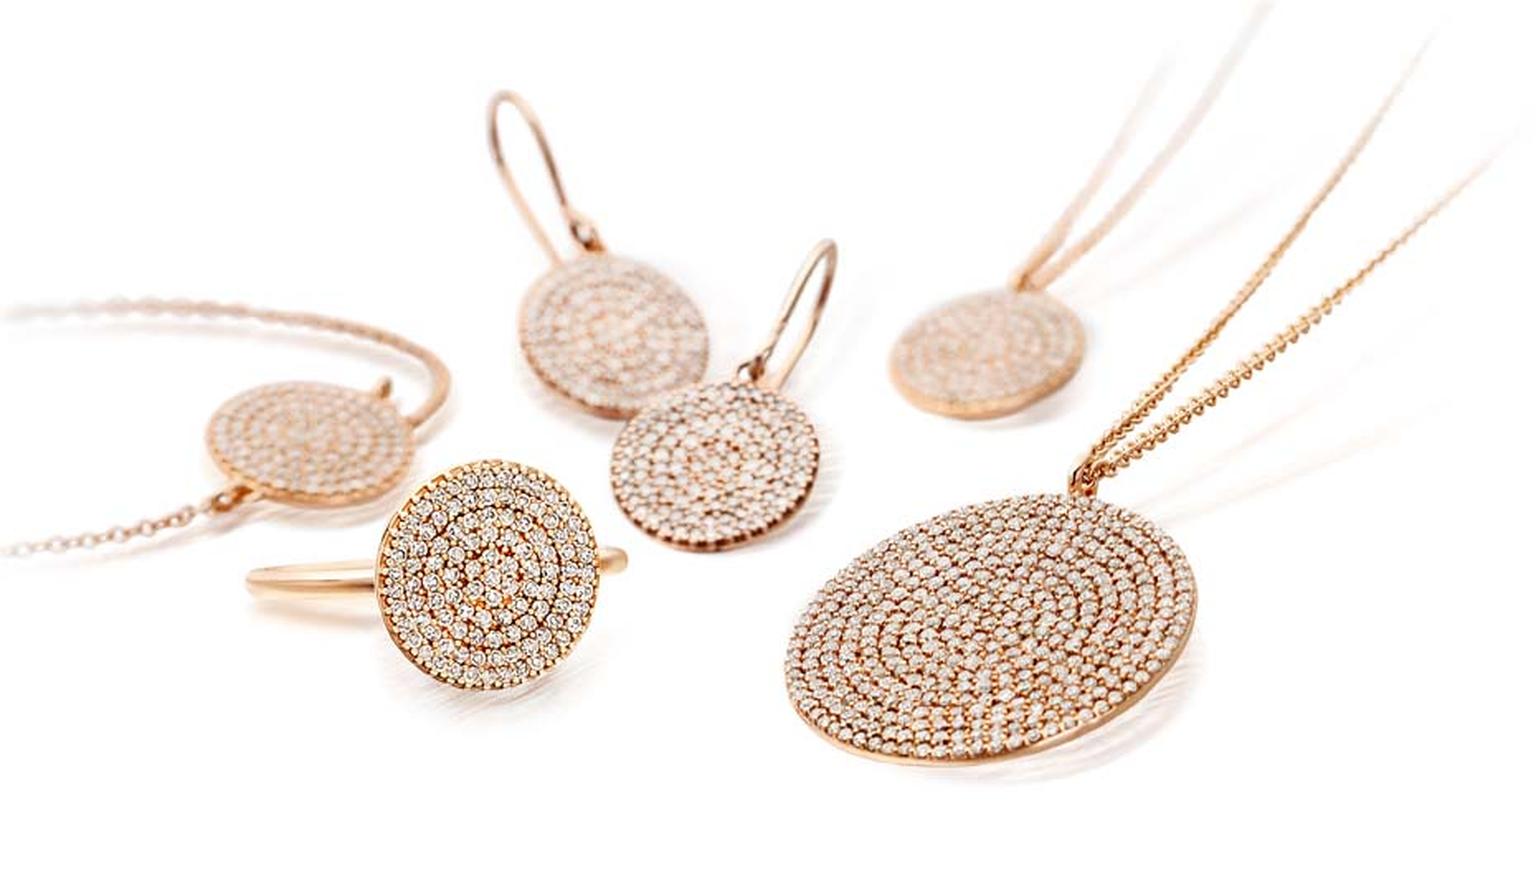 Astley Clarke Muse collection features rings, pendants, bracelets and earrings in rose gold with silver grey diamonds. The open setting at the back enables light to flow through.